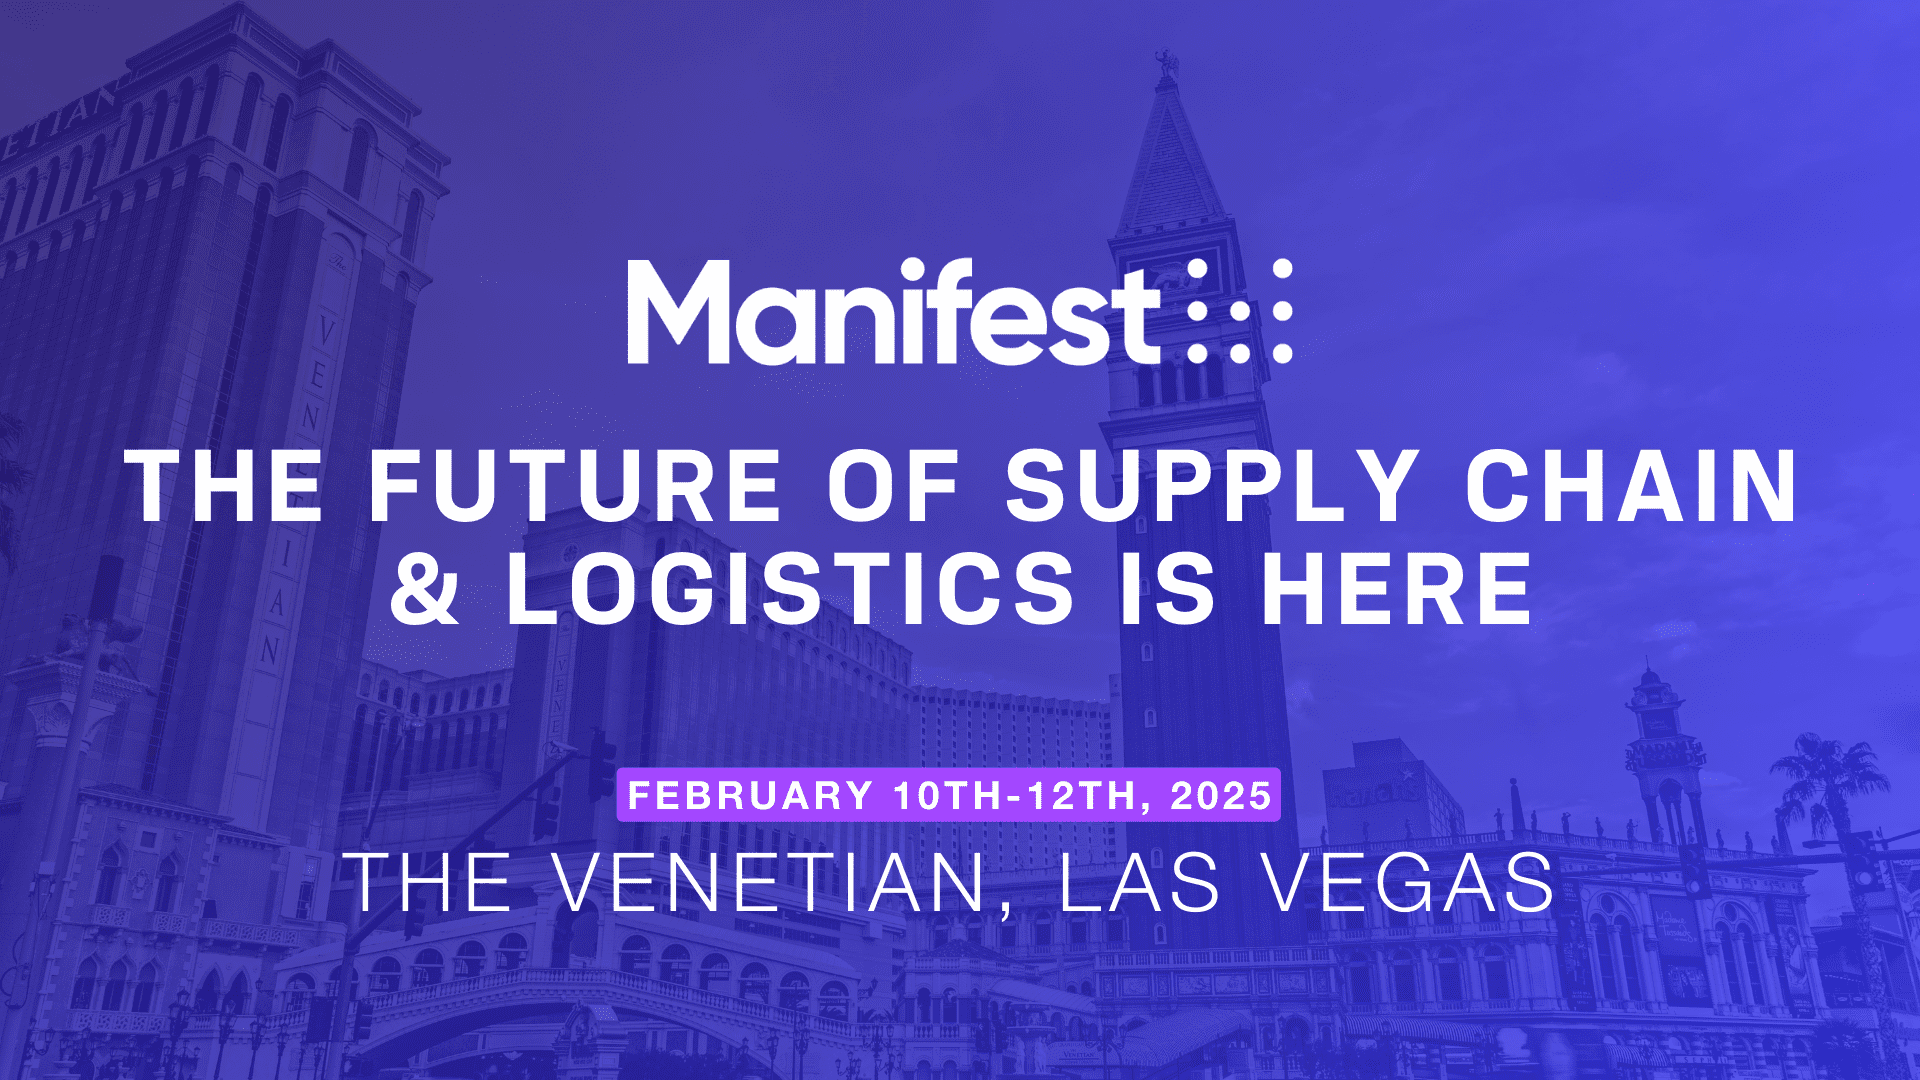 Manifest: The Future of Supply Chain & Logistics Is Here